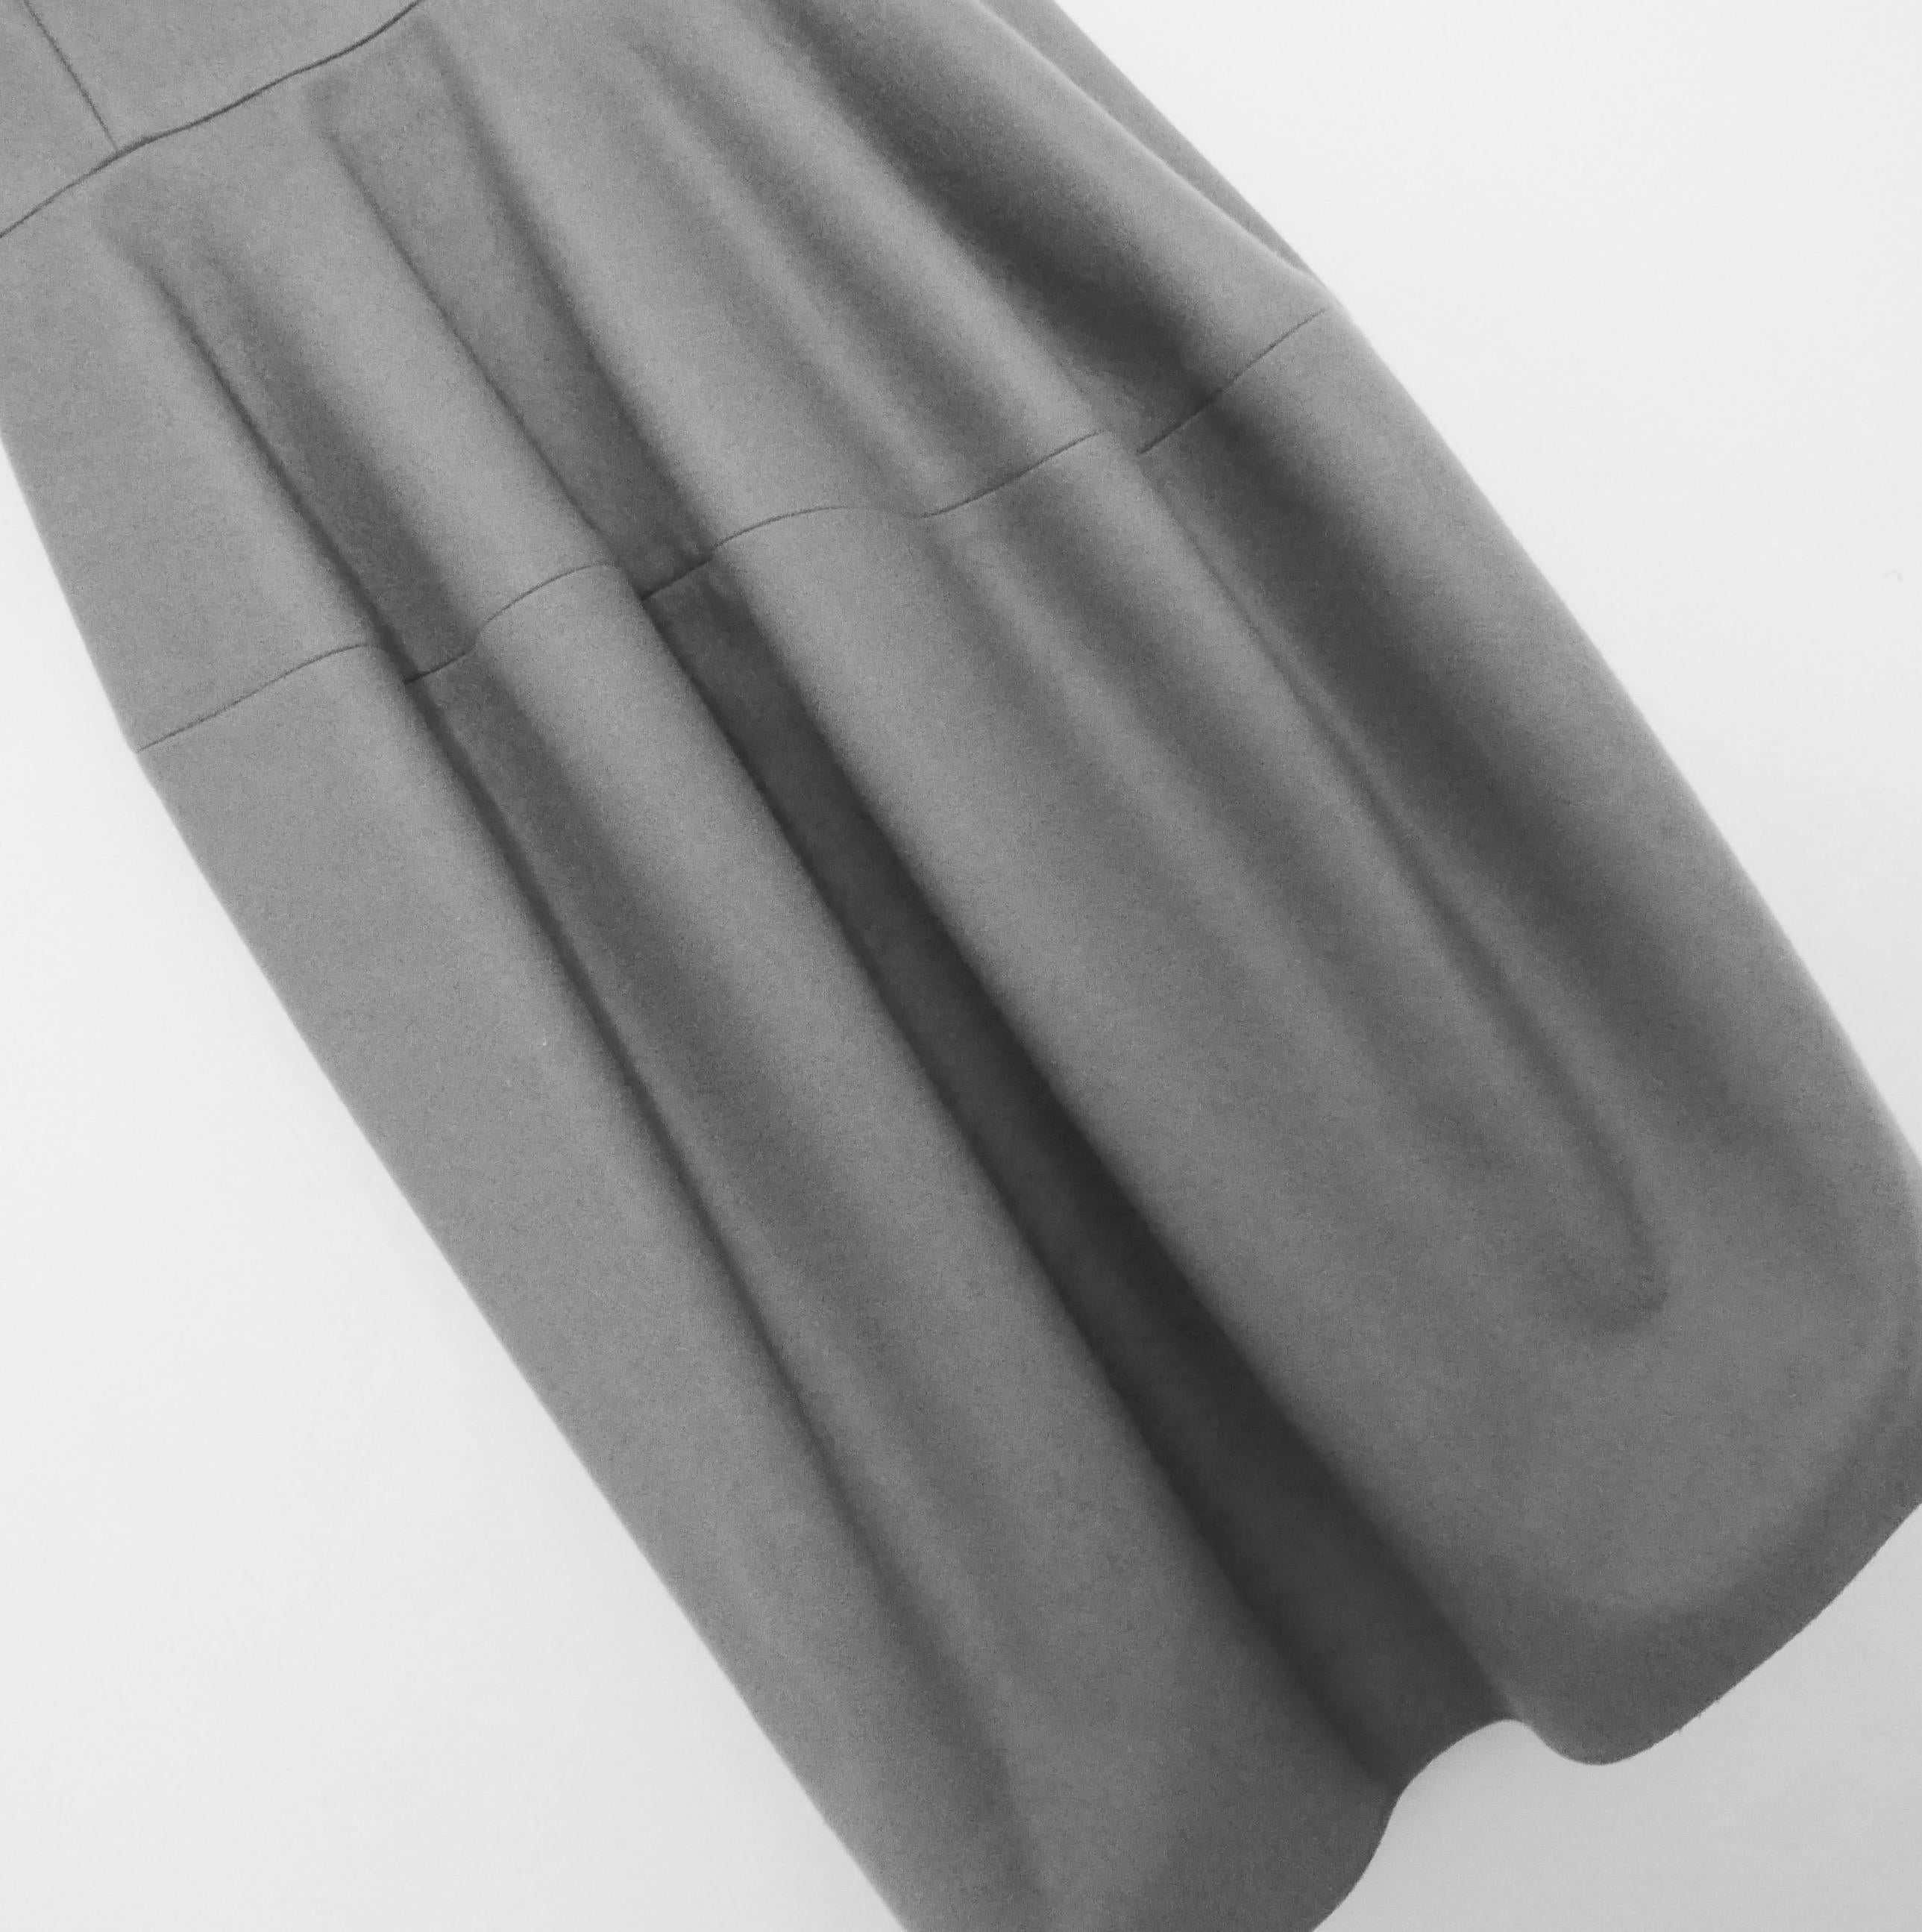 Iconic unworn archival dress from Stefano Pilati's Fall 2008 Yves Saint Laurent collection - one of Pilati's most important collections for the label. 

Gorgeously crafted from super smooth and soft dove grey cashmere, it has one of Pilati's most